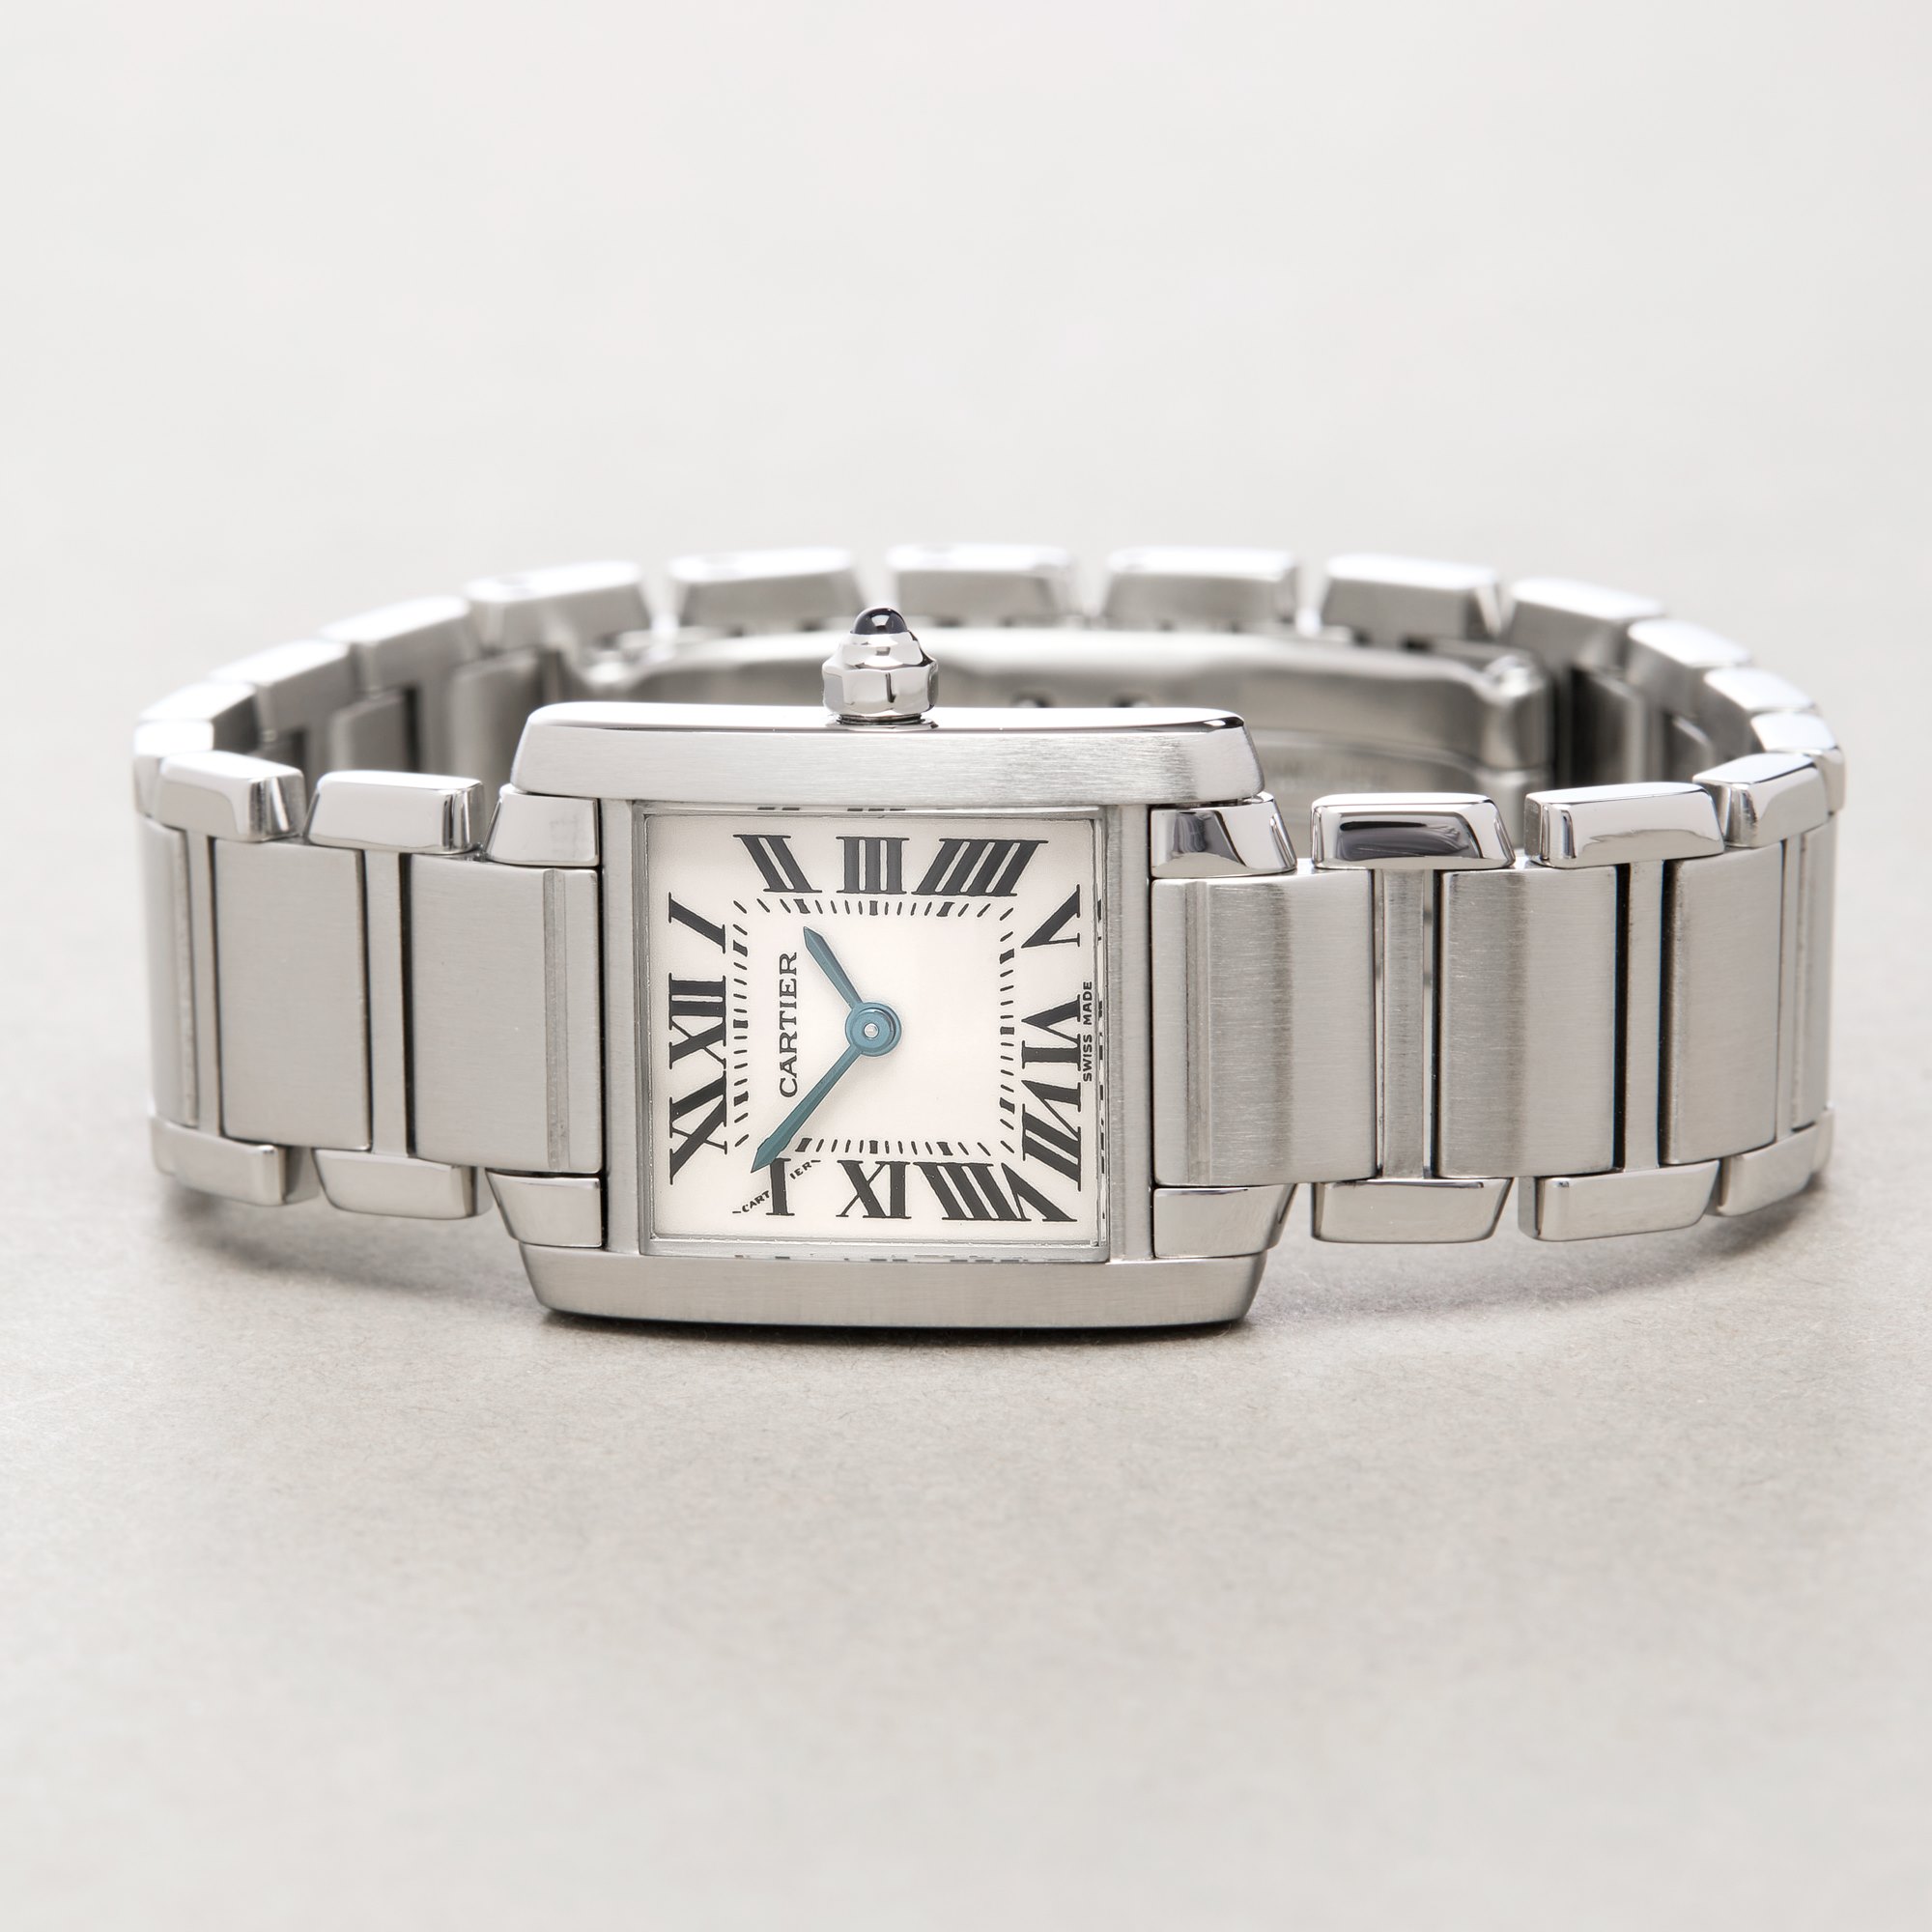 Cartier Tank Francaise Roestvrij Staal W51008Q3 or 2384